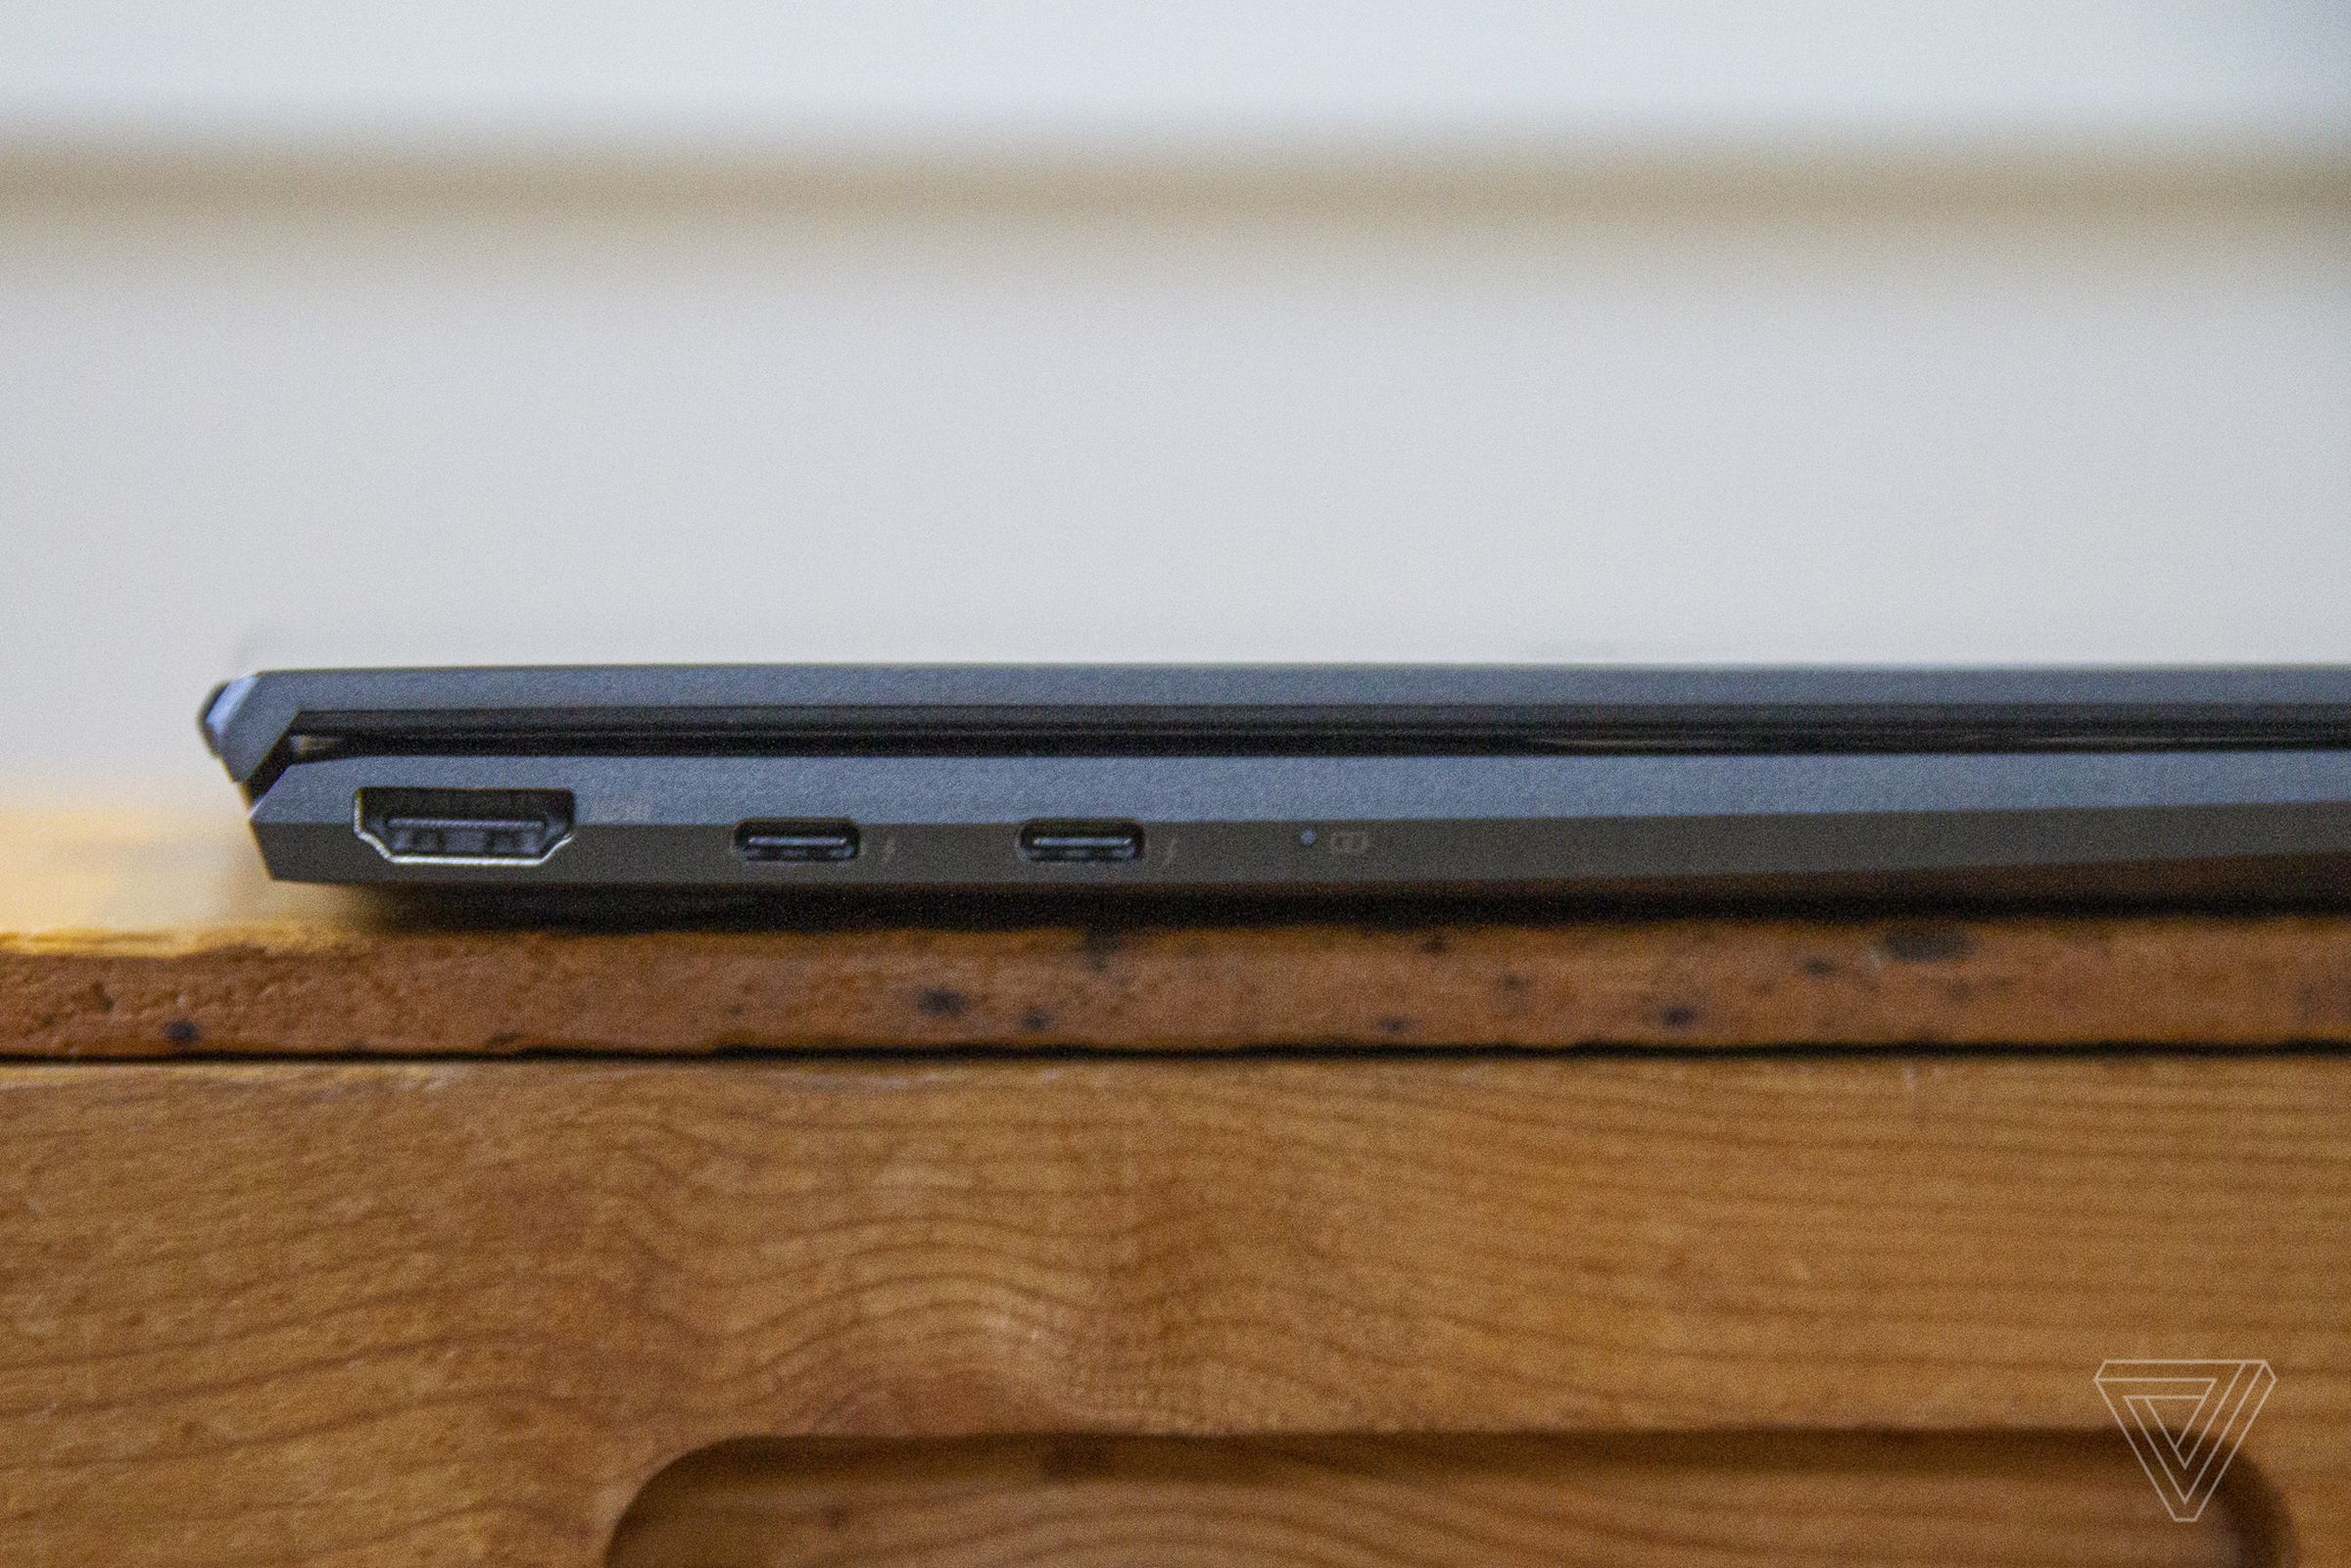 The Asus Zenbook 14 closed from the left side.